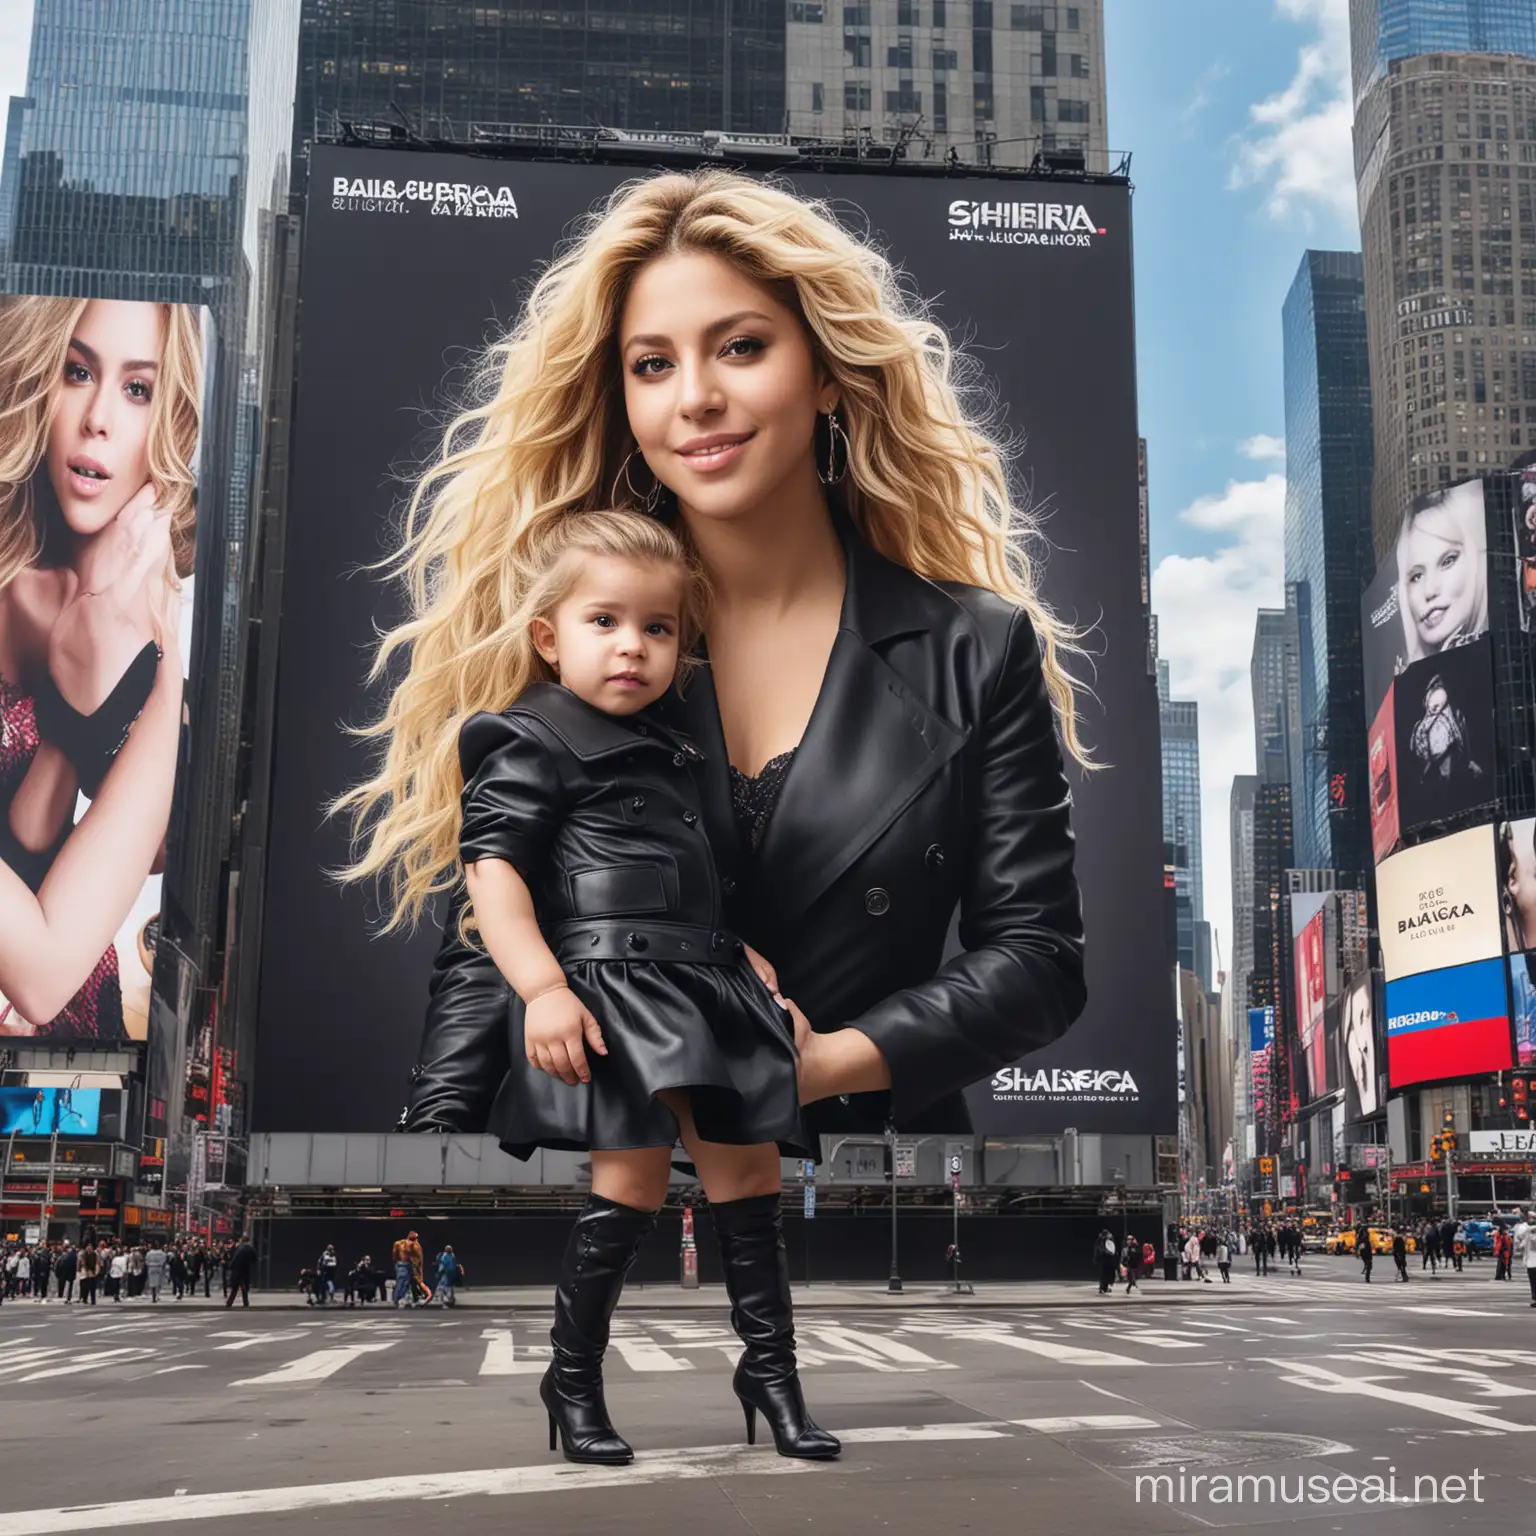 Design a billboard featuring shakira and their daughter, all dressed in Balenciaga outfits, in the streets of Times Square. Ensure that the clothing reflects the brand's distinctive style while being suitable for a warm and modern family atmosphere. Highlight the special bond between the mother and her daughter in this elegant representation of fashion and motherhood.